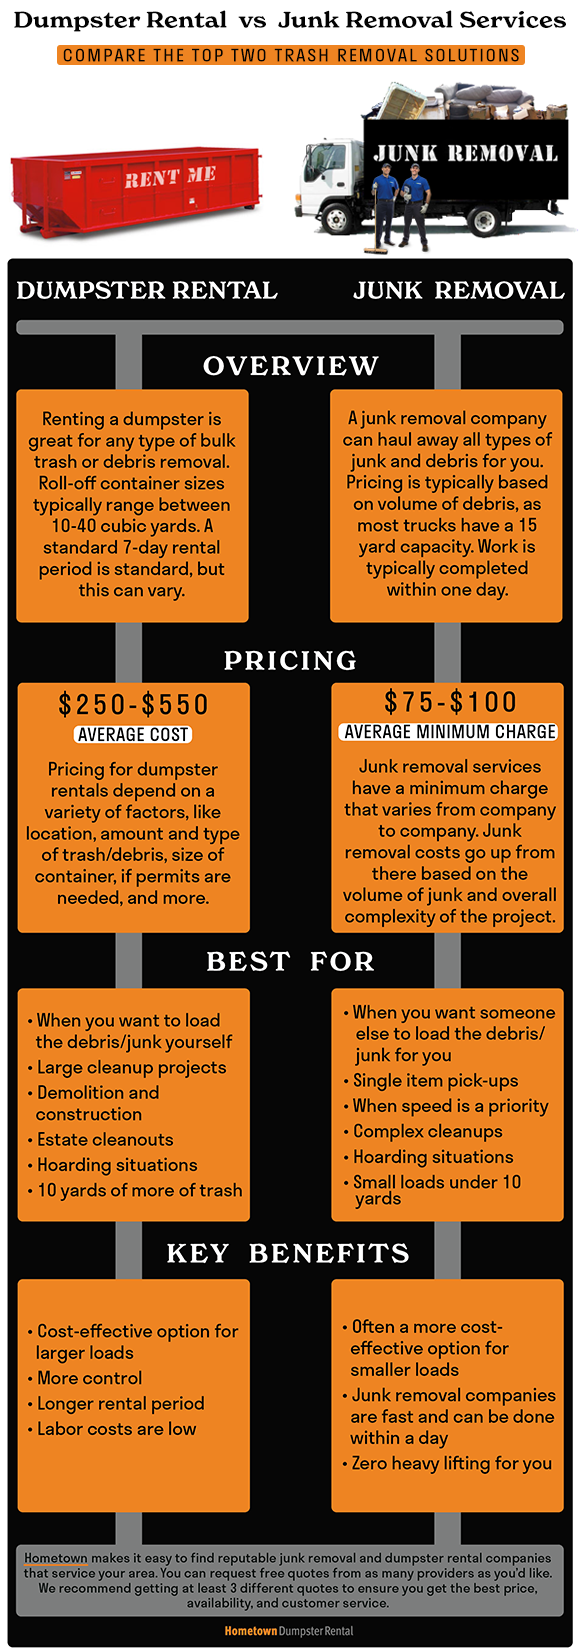 Comparing dumpster rental to junk removal services infographic